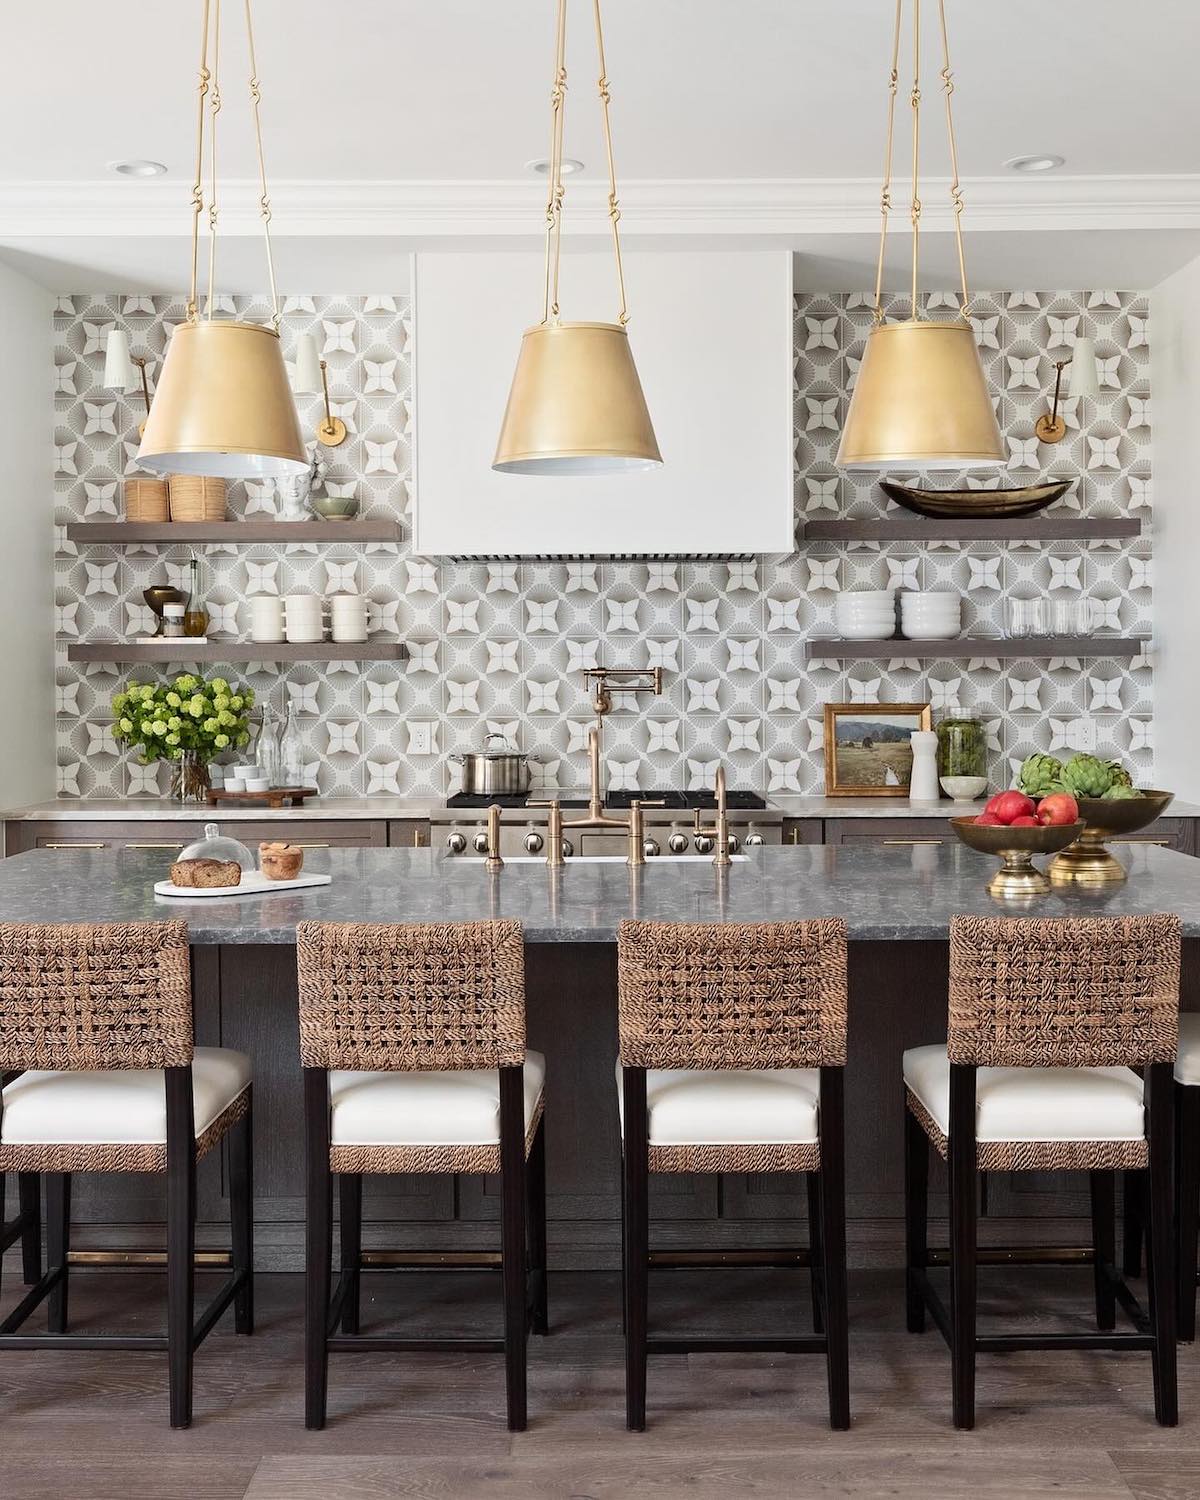 Modern kitchen with spacious island and elegant gold pendant lights.